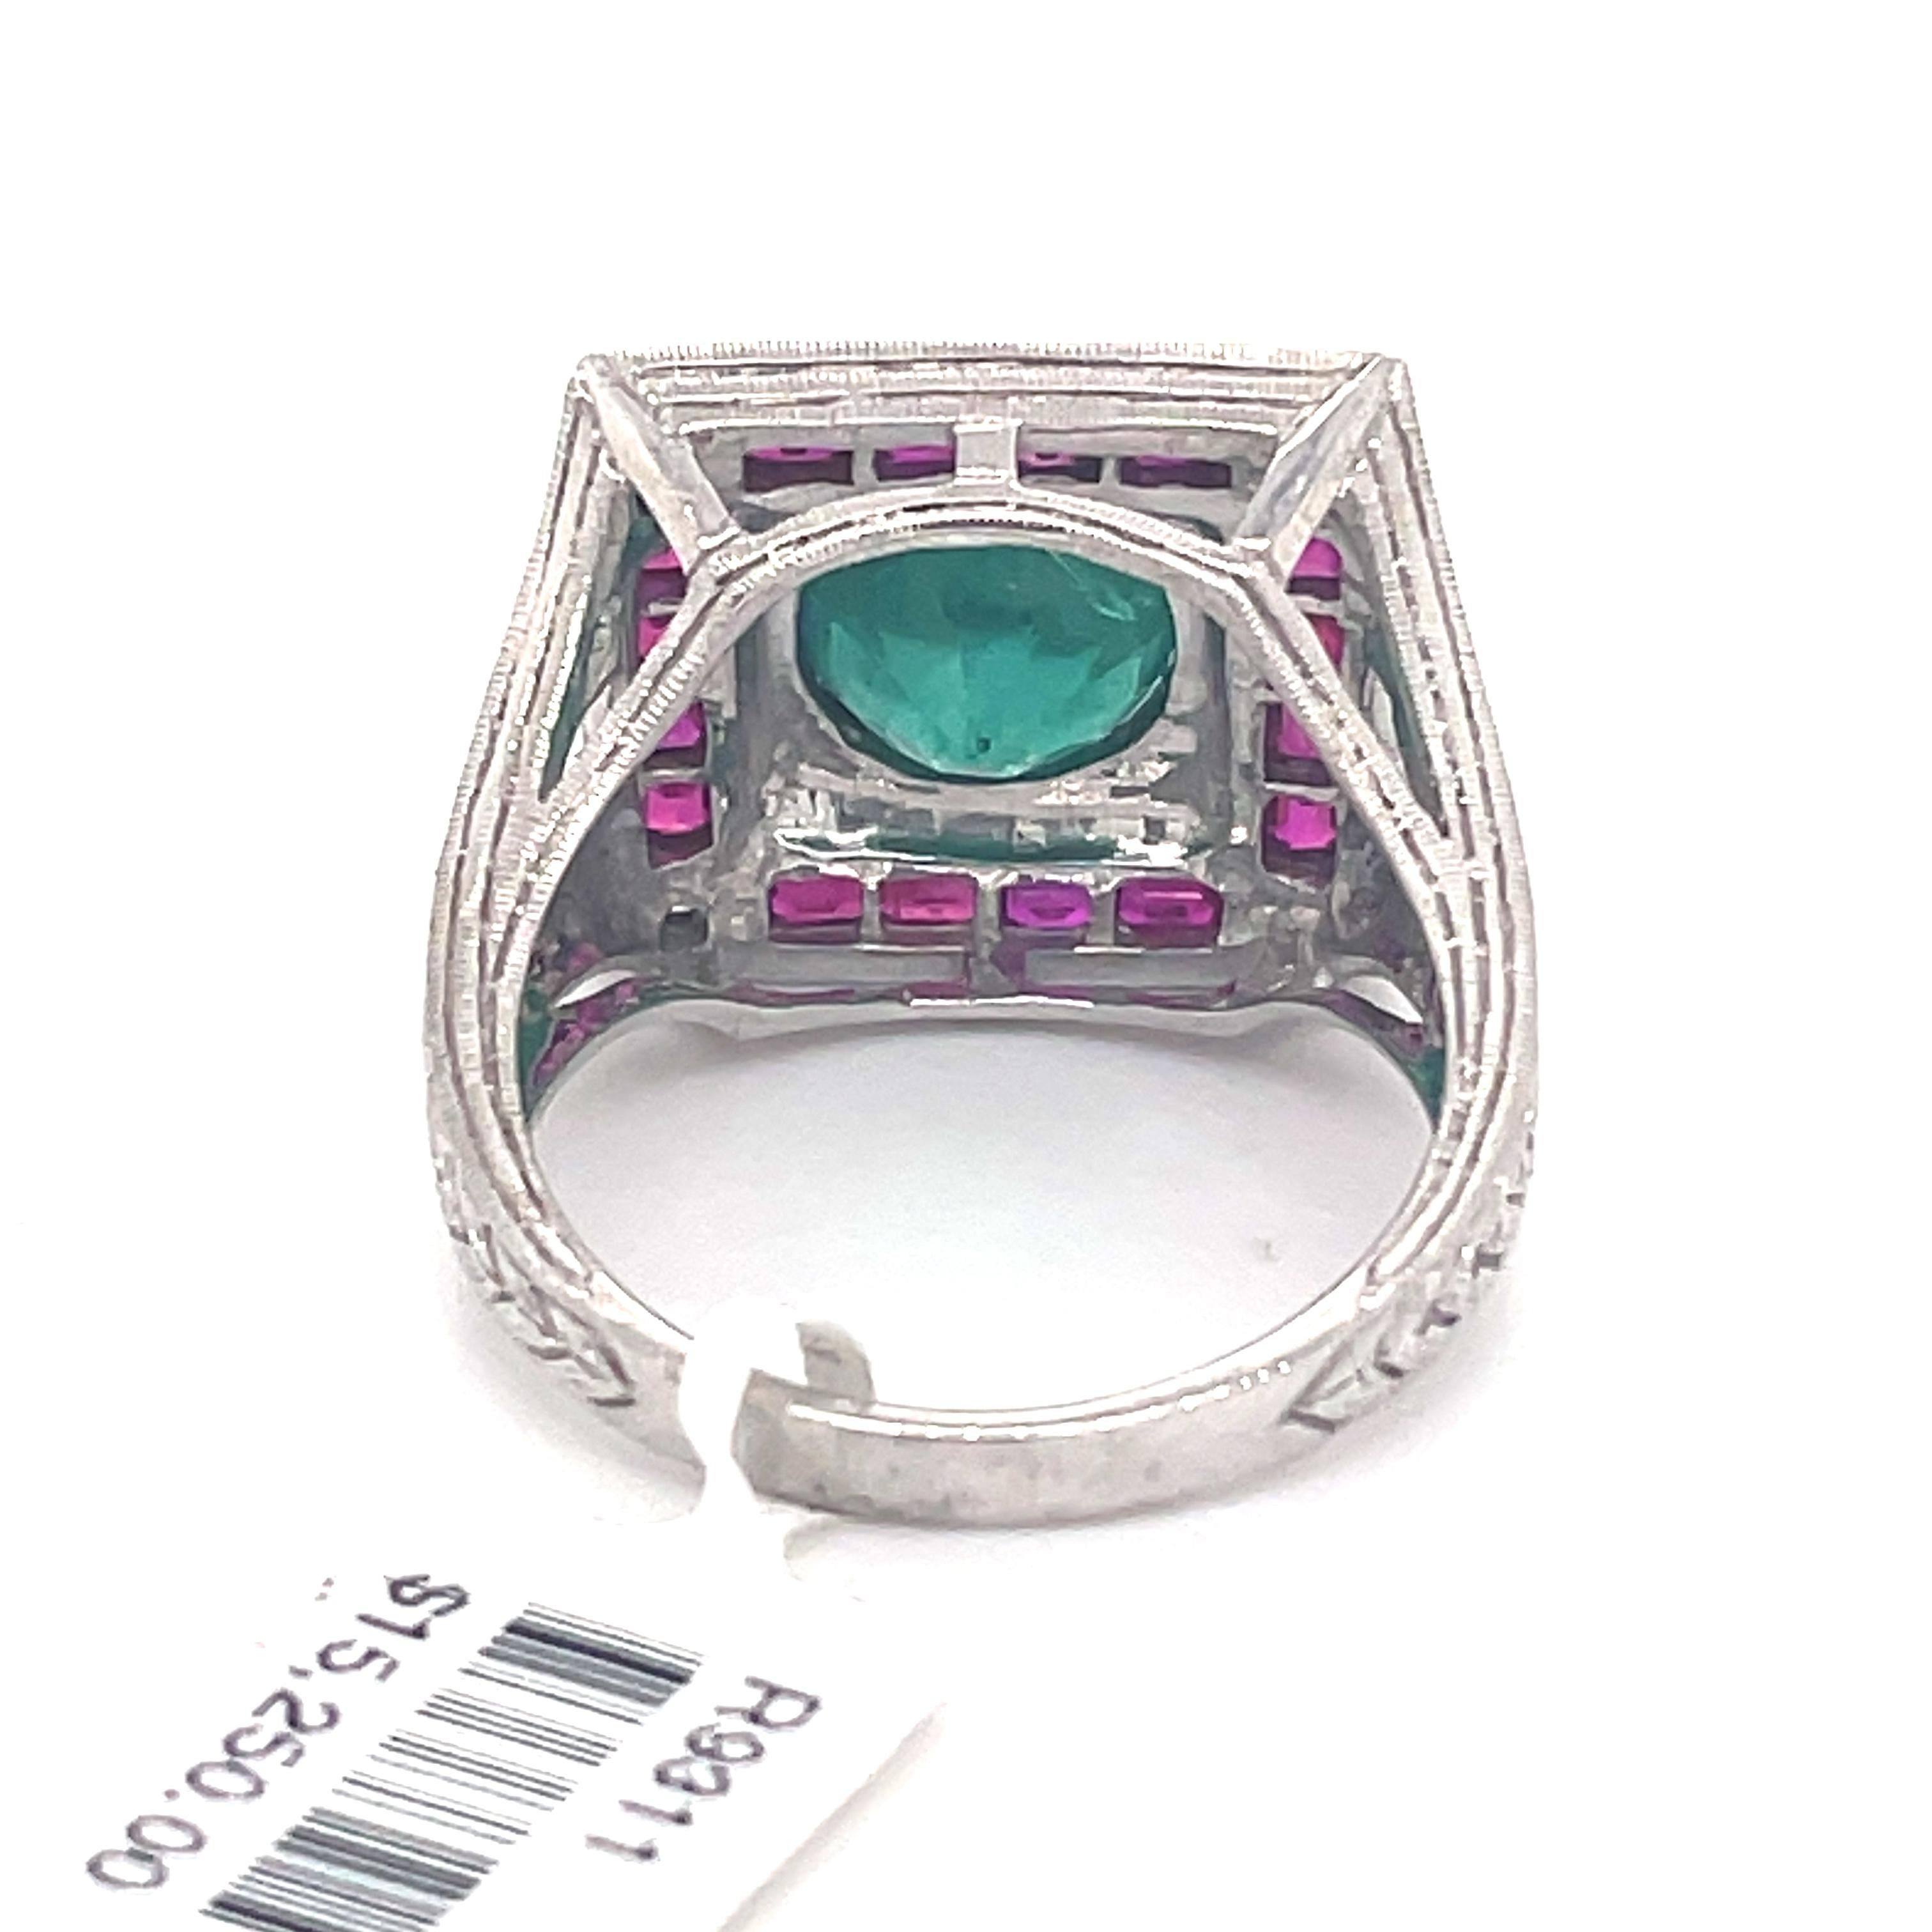 Women's Art Deco Style 2.15 Carat Emerald with Rubies & Diamonds Ring 18k White Gold For Sale